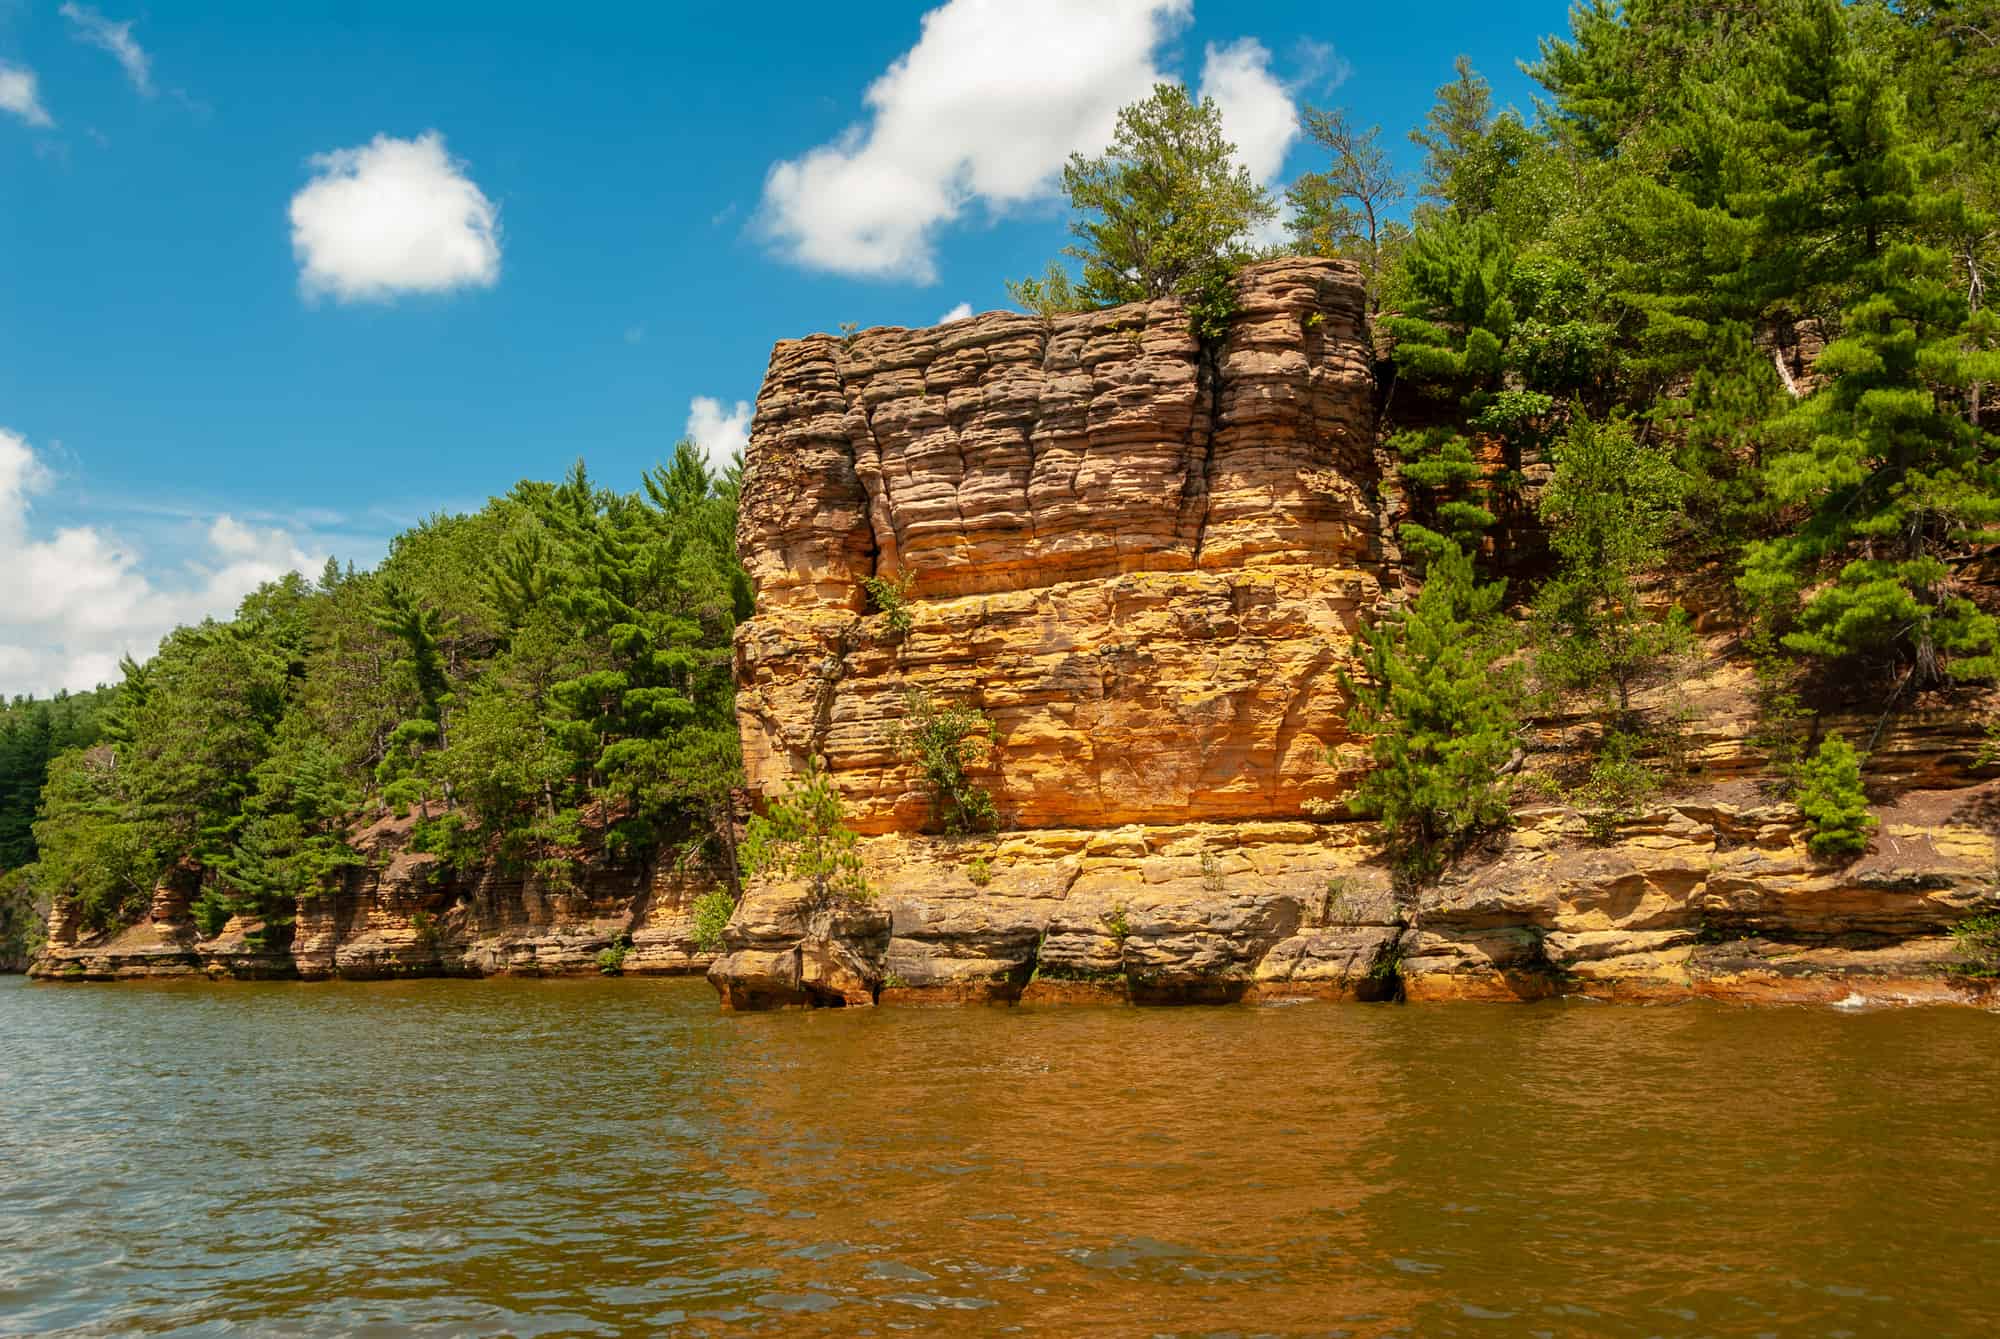 25 (Slightly) Cheesy Facts About Wisconsin | Mental Floss